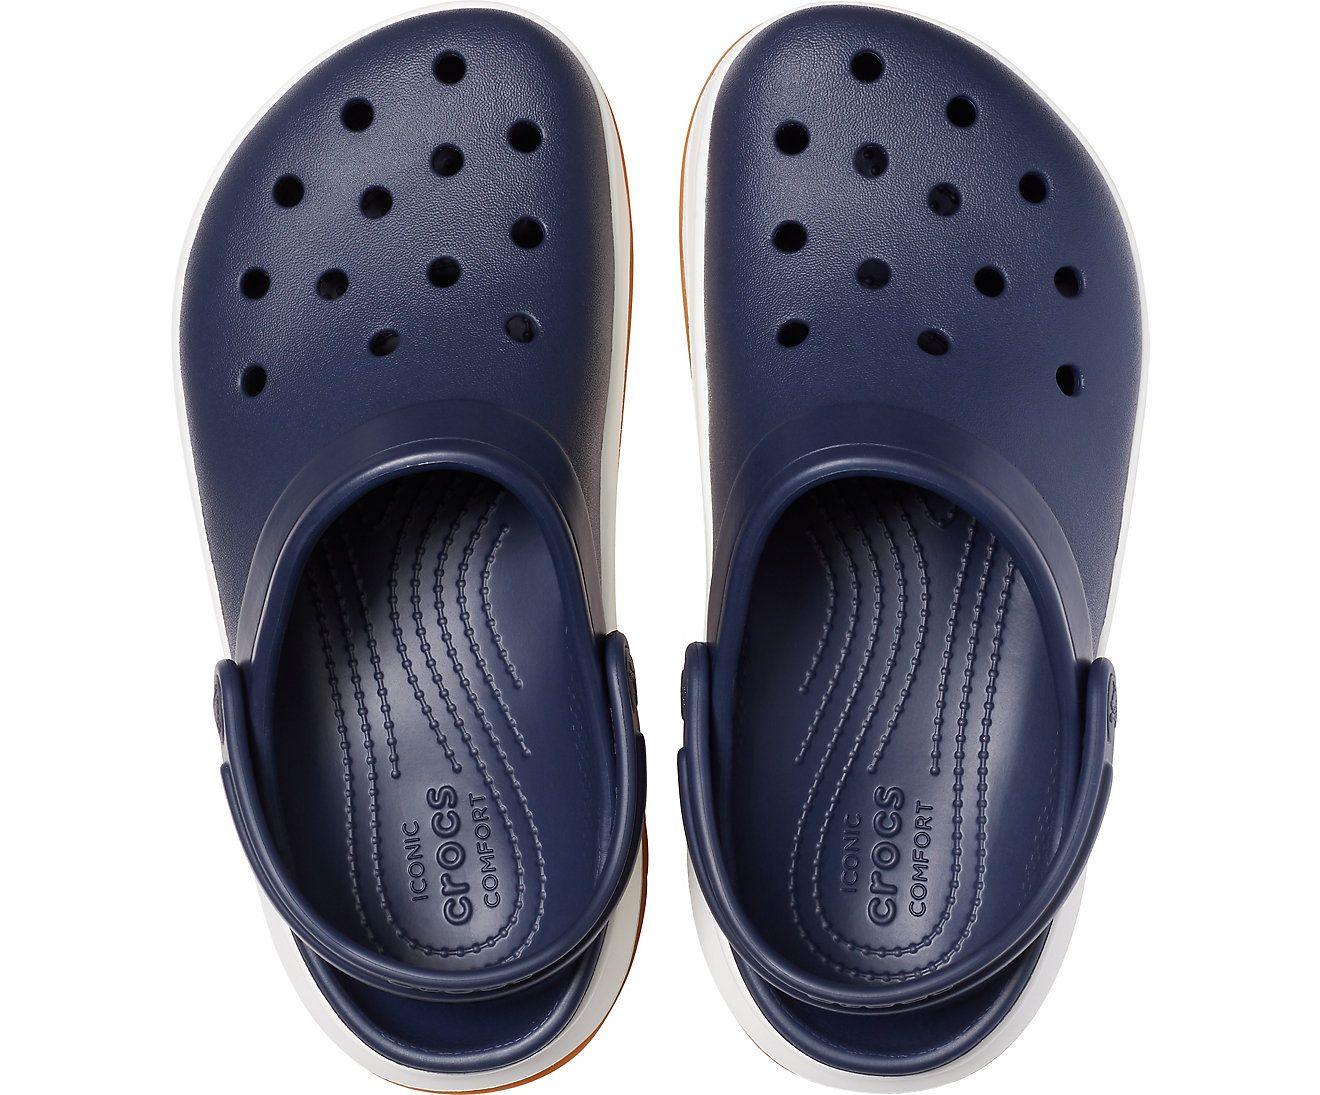 Authentic Crocband Full Force Clog - Navy White | mStore | mTravel ...